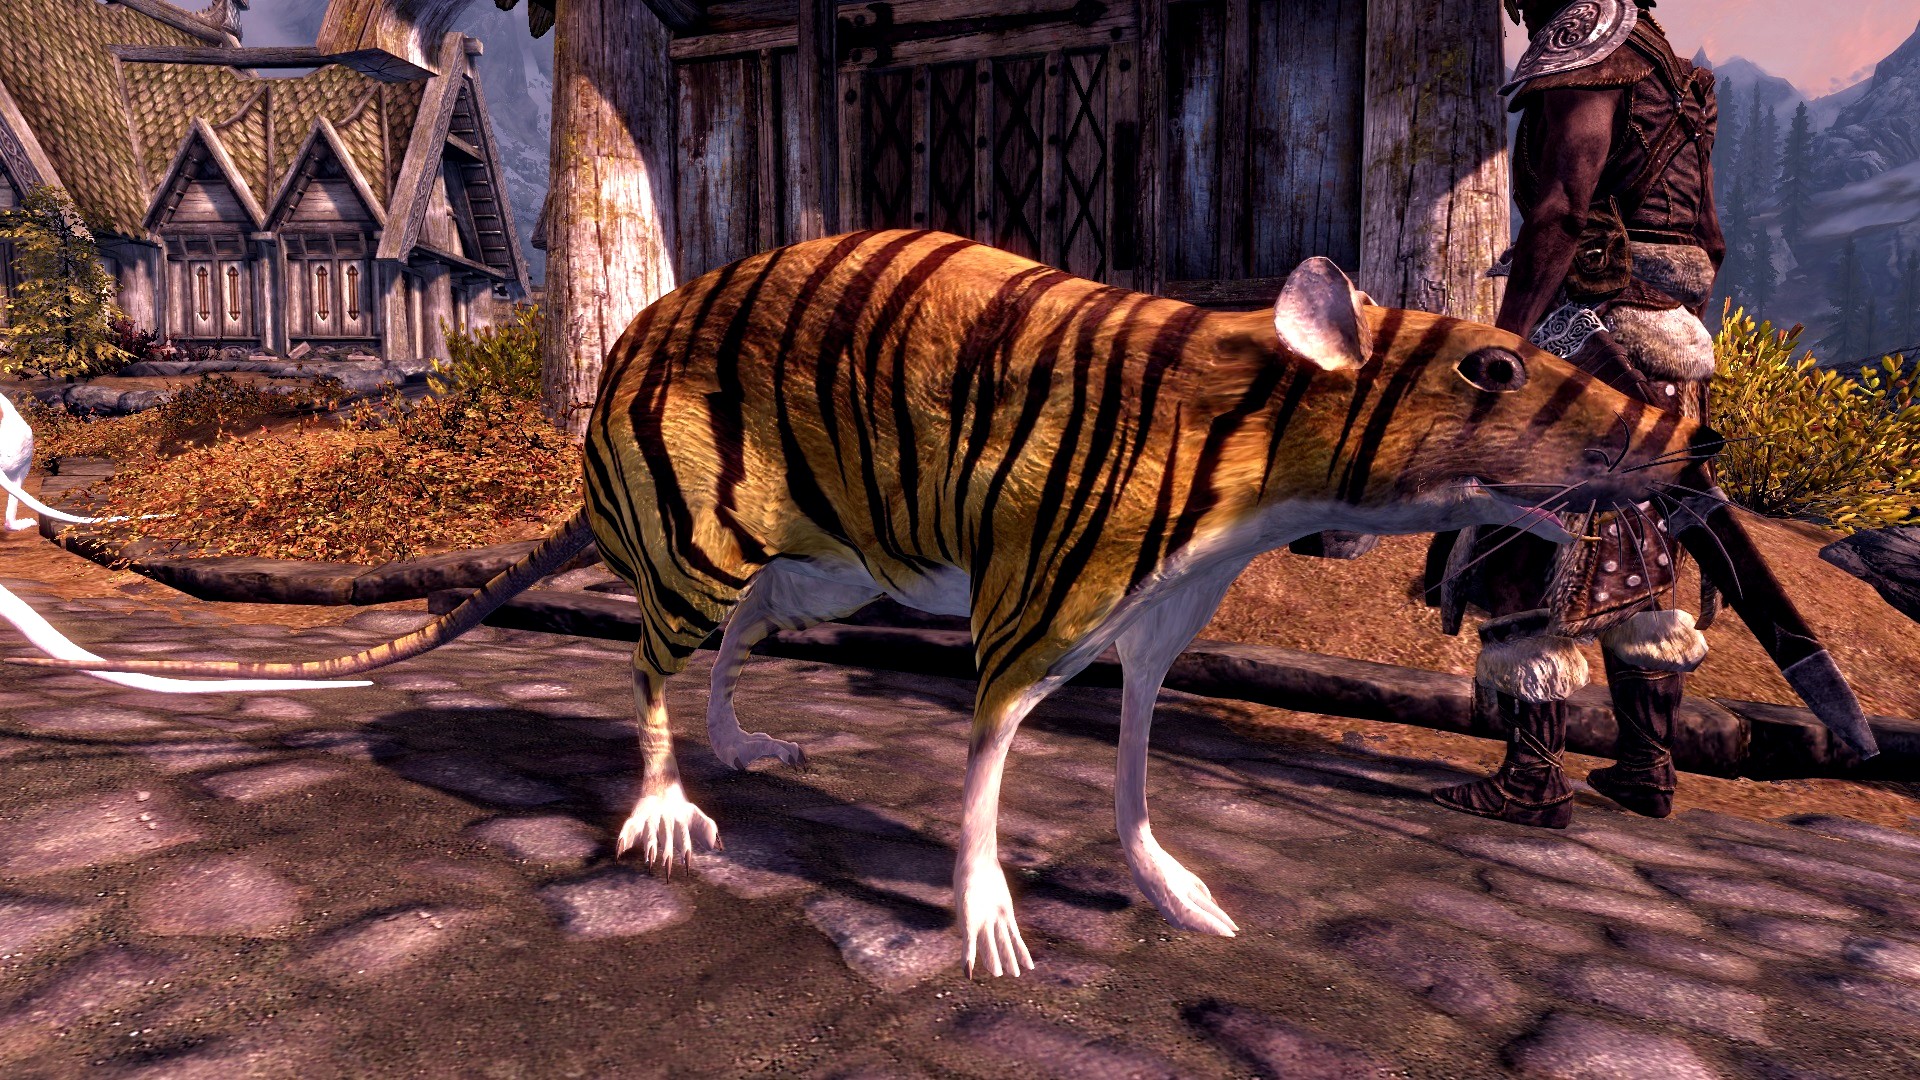 This Skyrim mod adds giant rat companions, with stripes